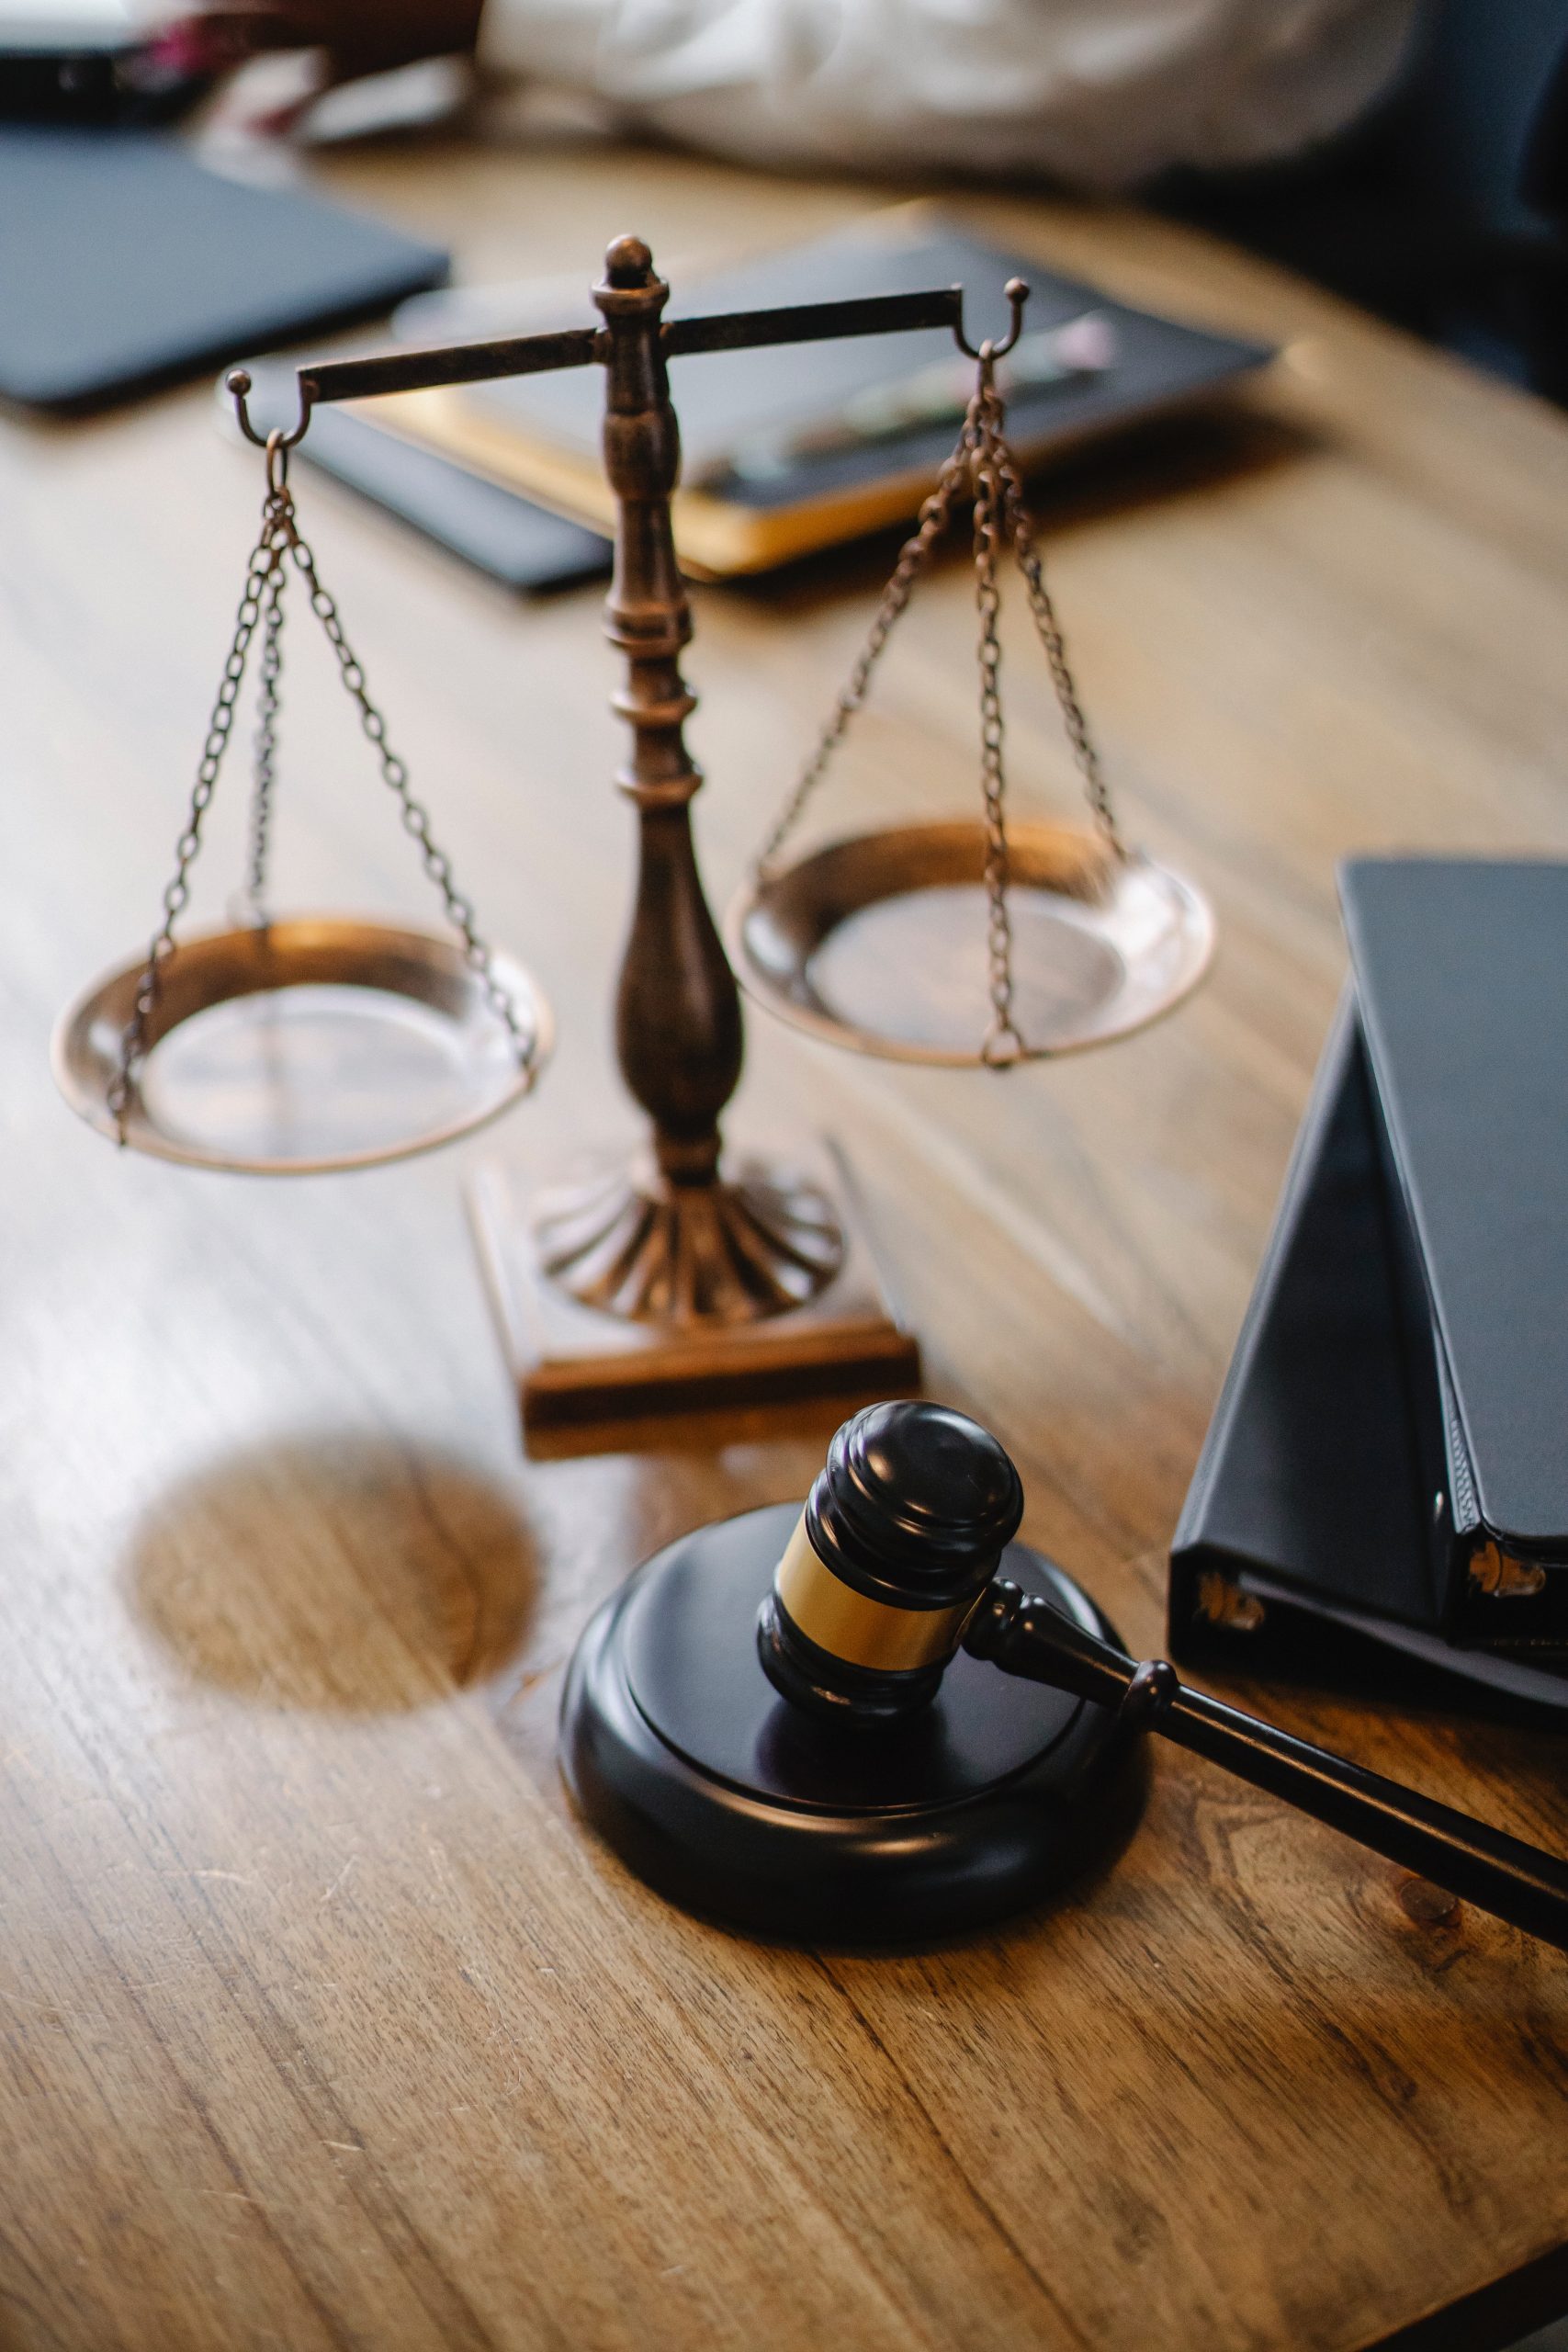 A gavel and scales sit on a wooden desk